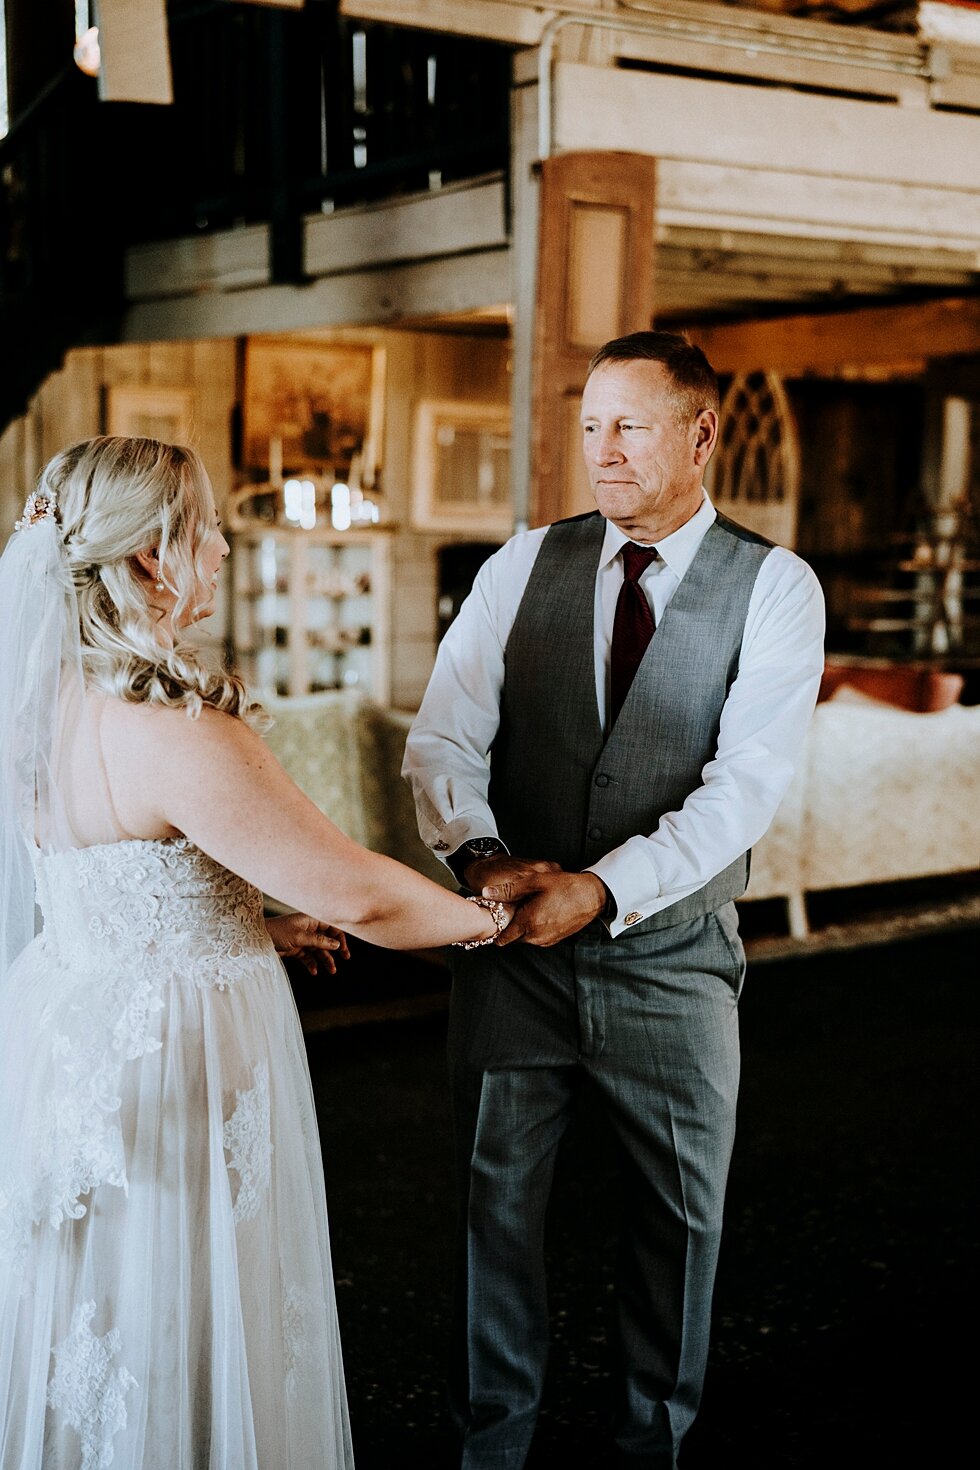  First look moment between father of the bride and his gorgeous daughter. So special! #vintagebarn #westernwedding #midwayky #vintagewedding #horses #thatsdarling #weddingday #weddinginspiration #weddingphoto #love #justmarried #Indianaphotographer #